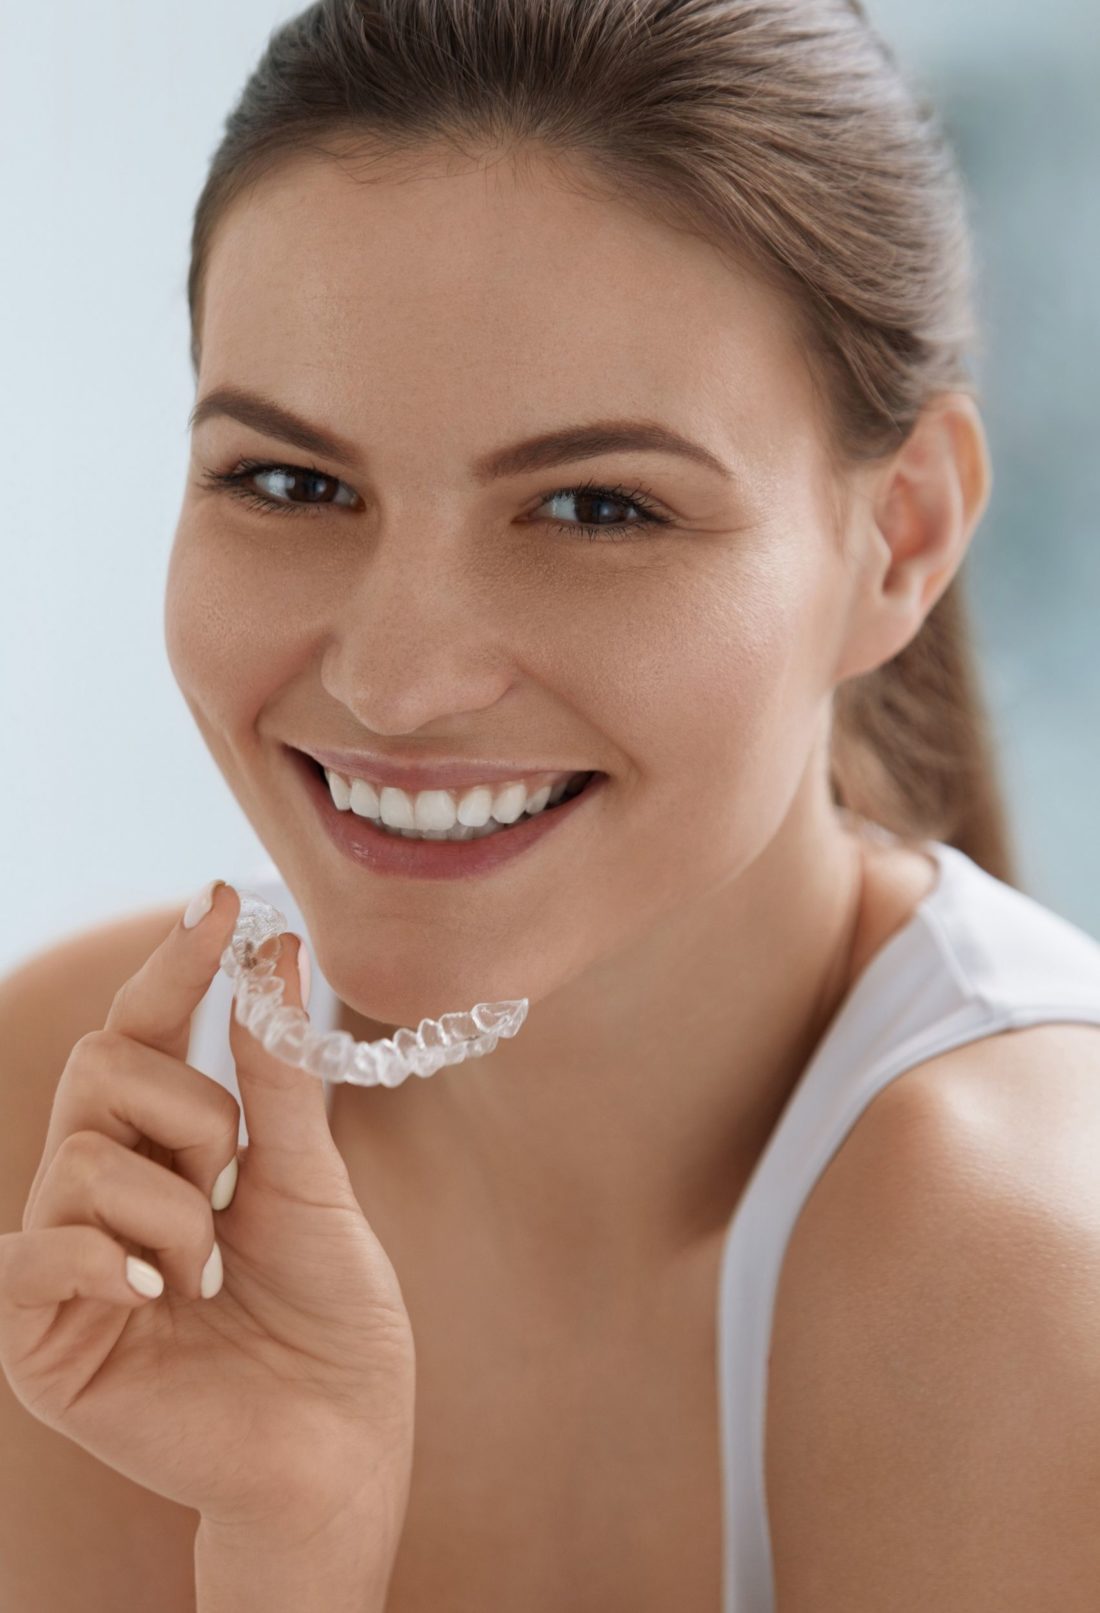 Everything You Must Know About Teeth Whitening Strips - Rita Reviews